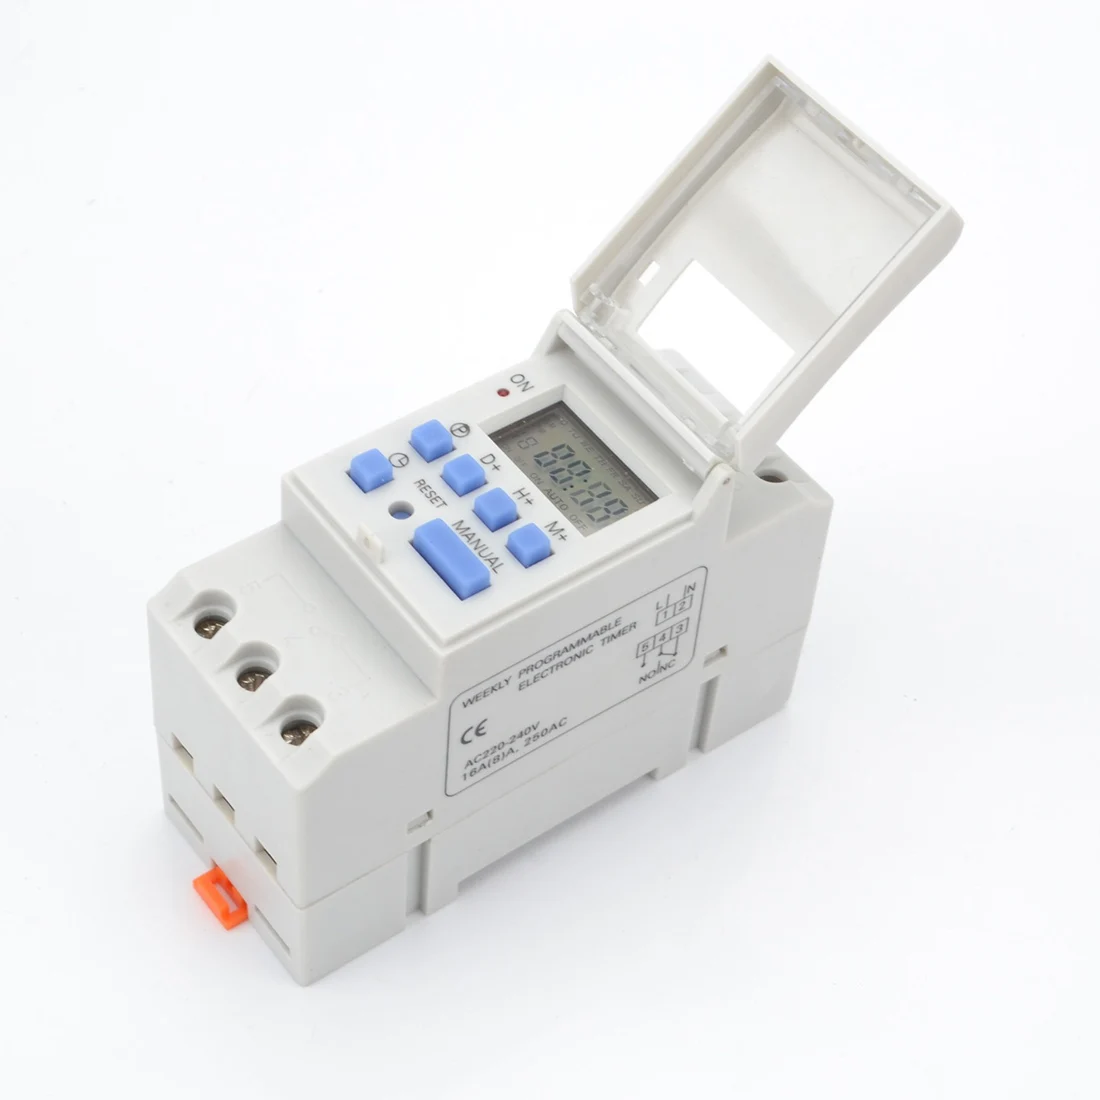 7 Days Programmable Digital Timer Switch Relay Control 220V 230V 6A 10A 16A 20A 25A 30A Electronic Weekly Home Timing Socket 1pc lcd display switch weekly programmable electronic relay time switch timer